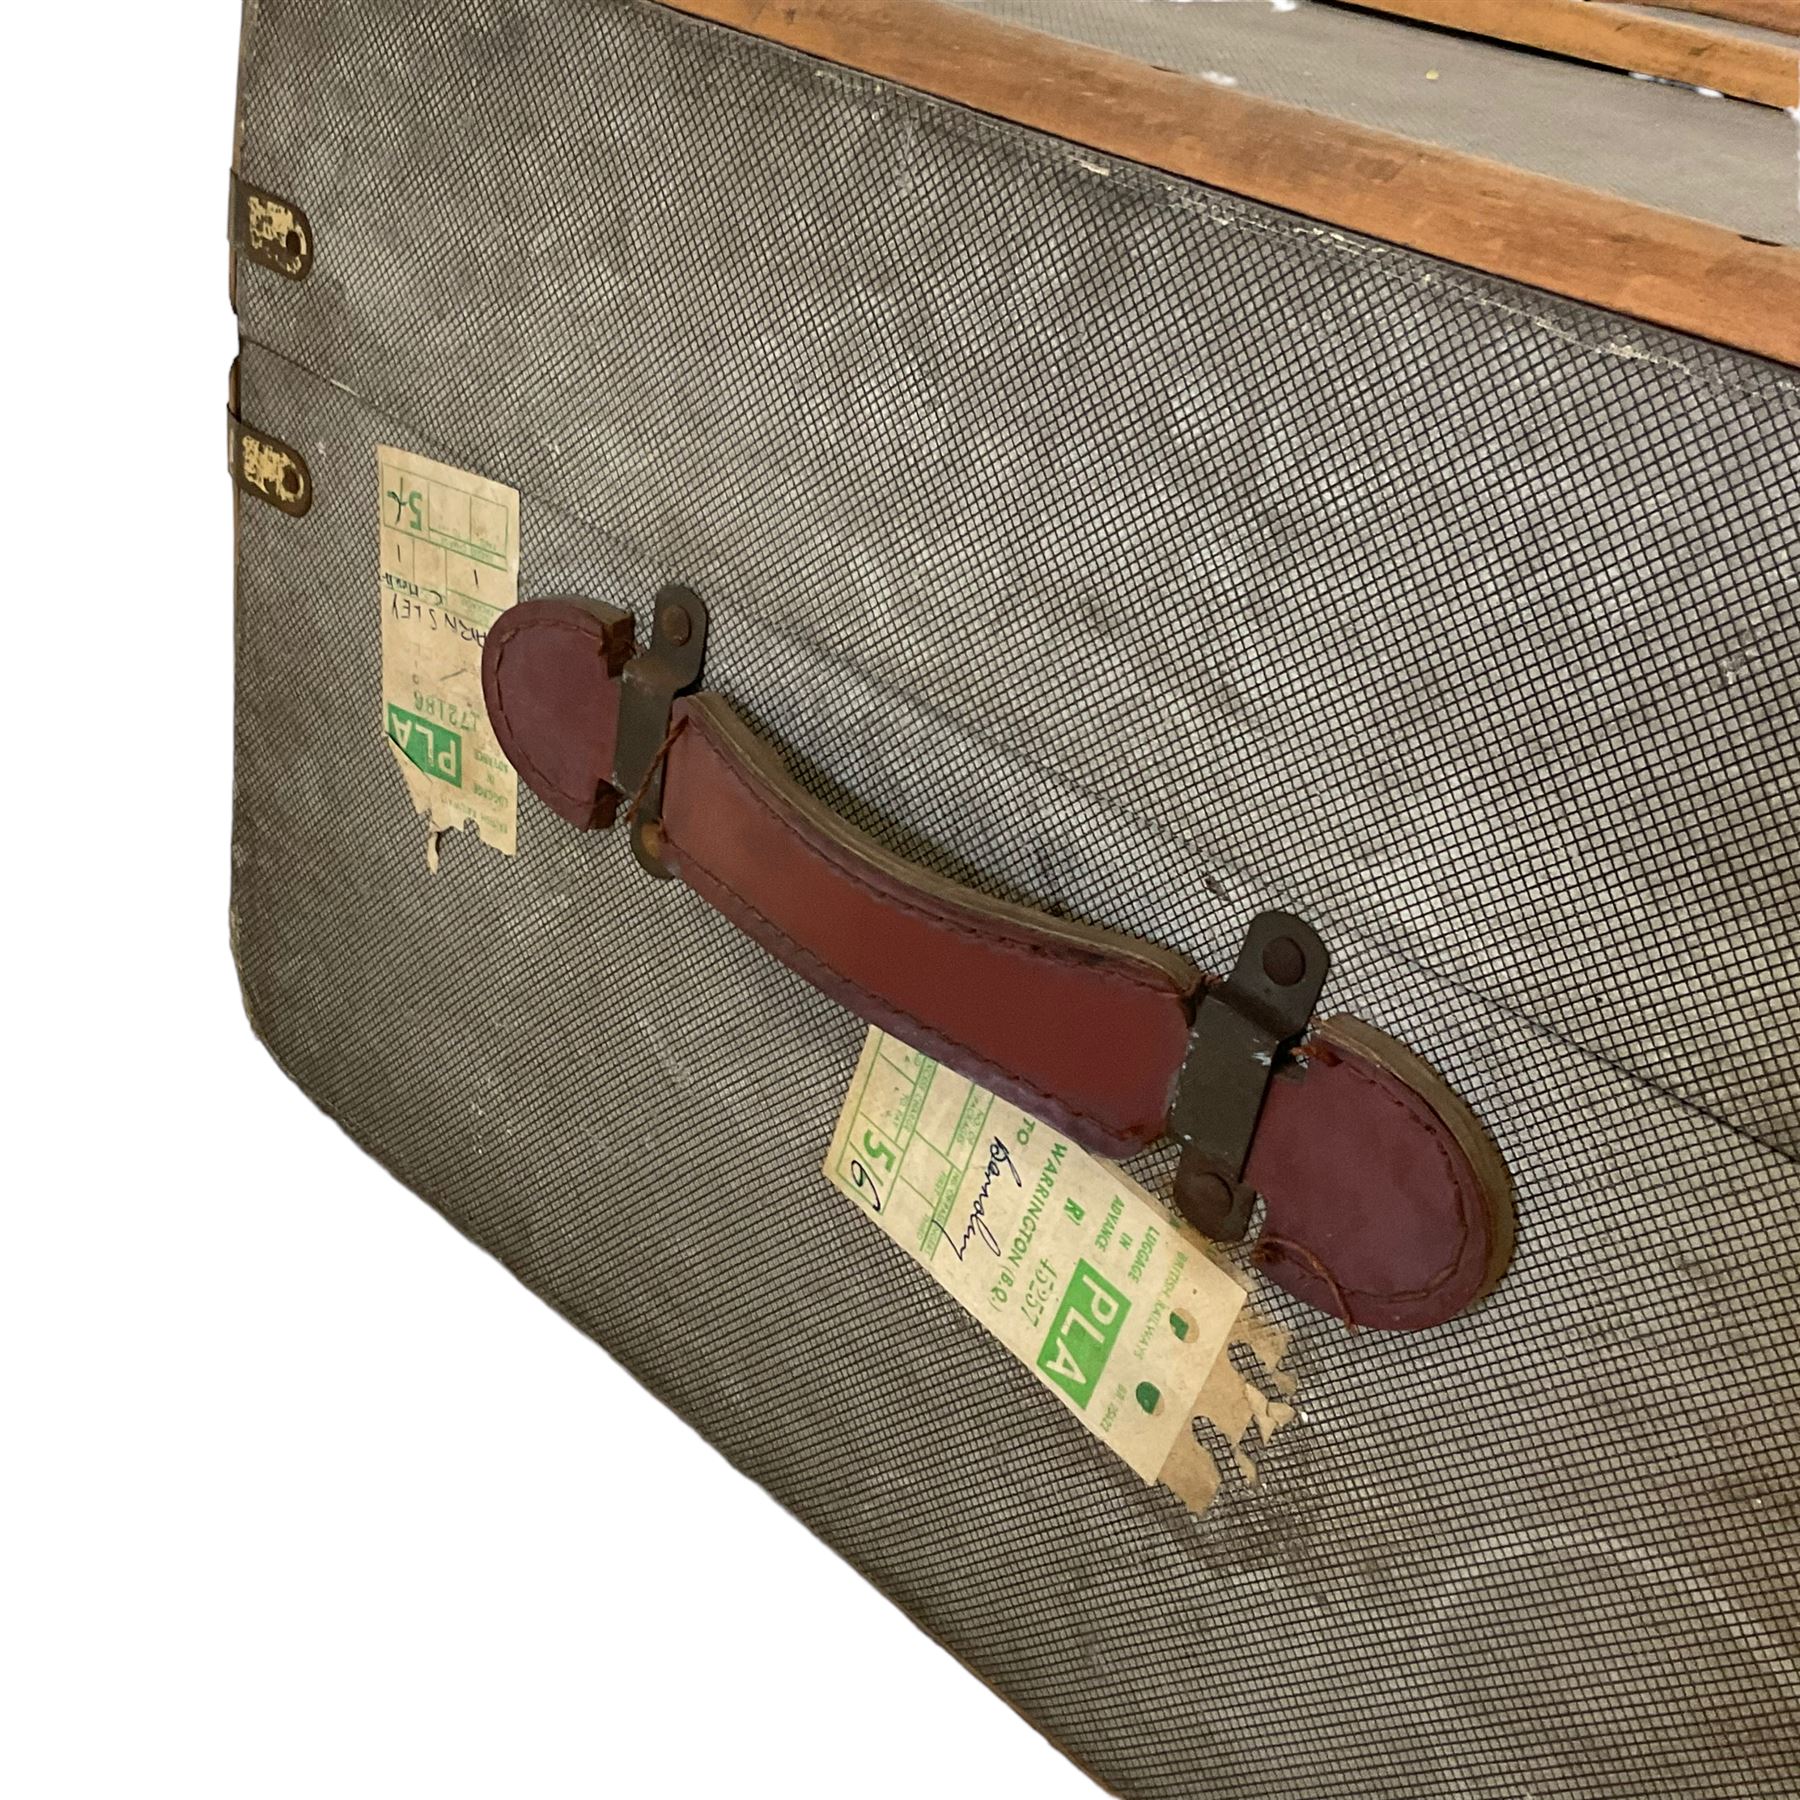 20th century wooden bound trunk - Image 3 of 4